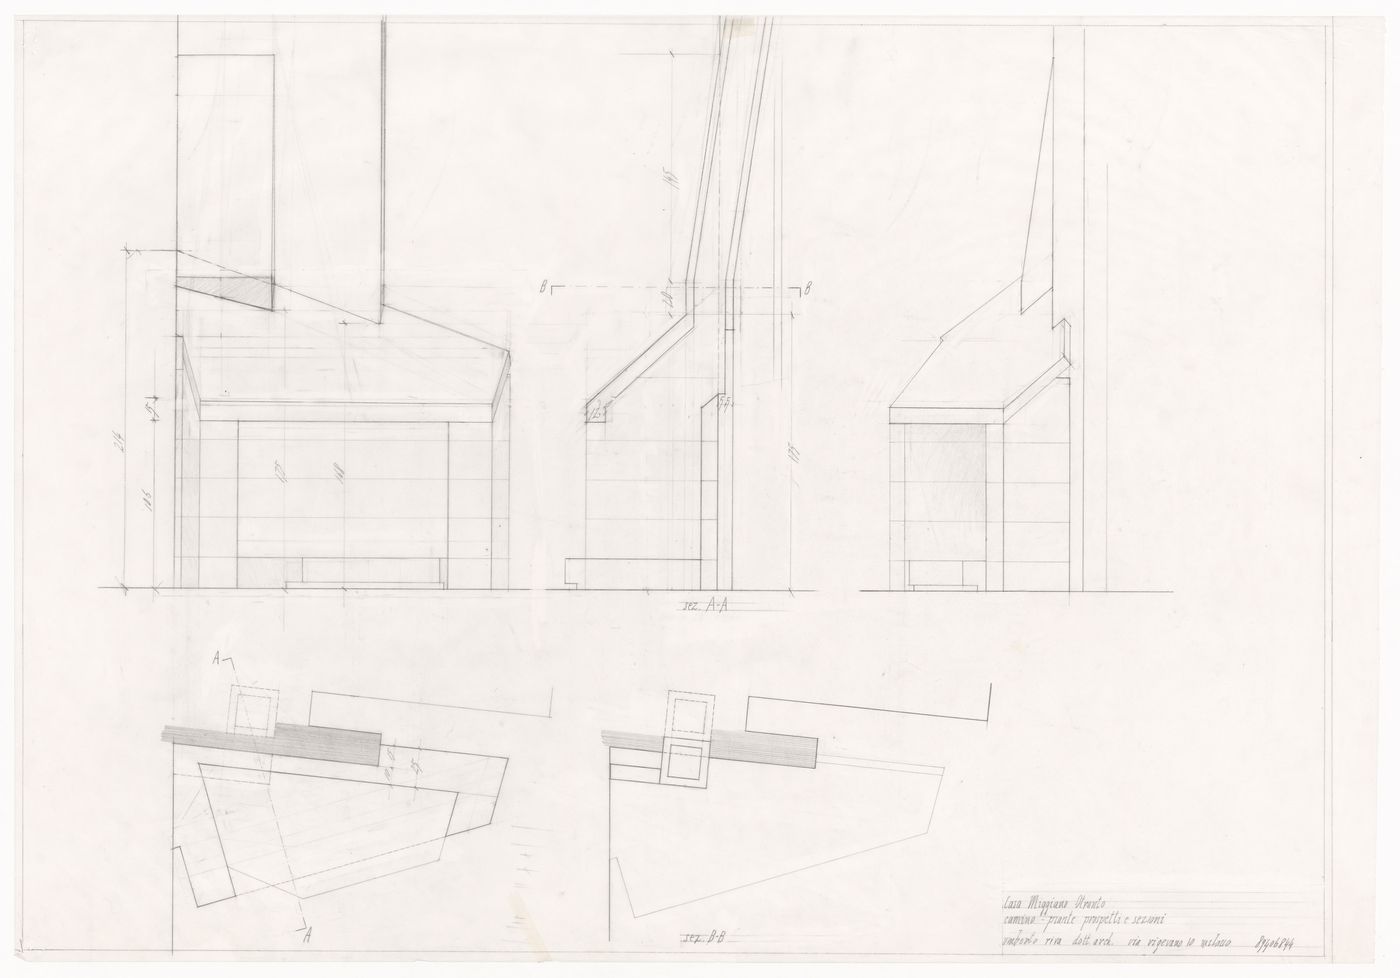 Fireplace sections, plans, and elevations for Casa Miggiano, Otranto, Italy